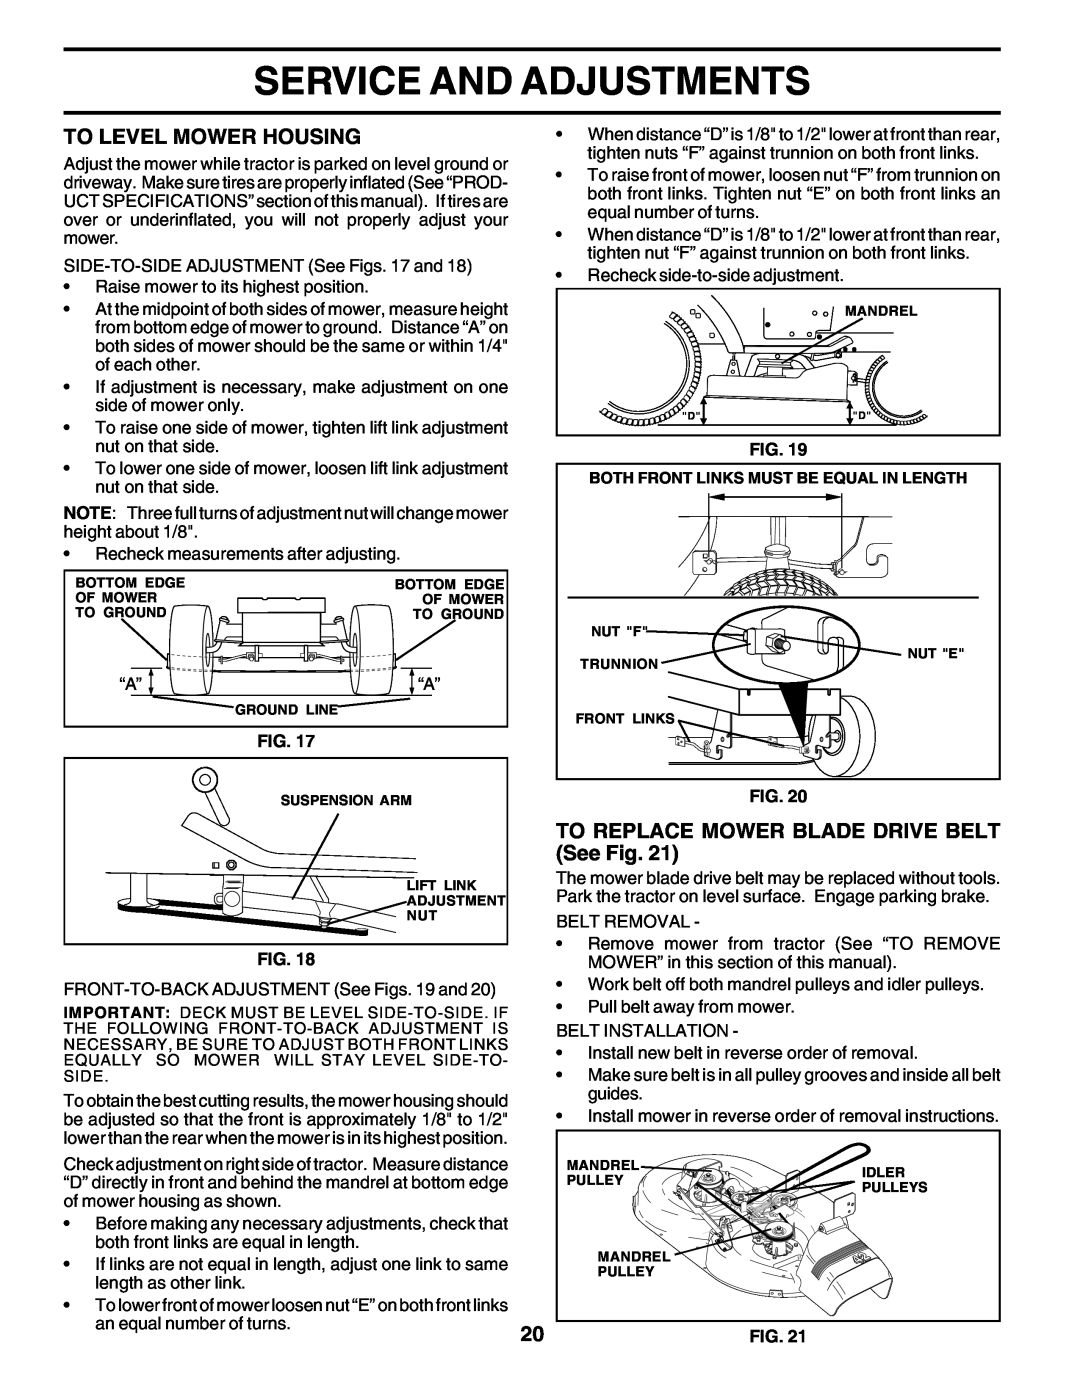 Poulan PO14542D manual Service And Adjustments, To Level Mower Housing, TO REPLACE MOWER BLADE DRIVE BELT See Fig 